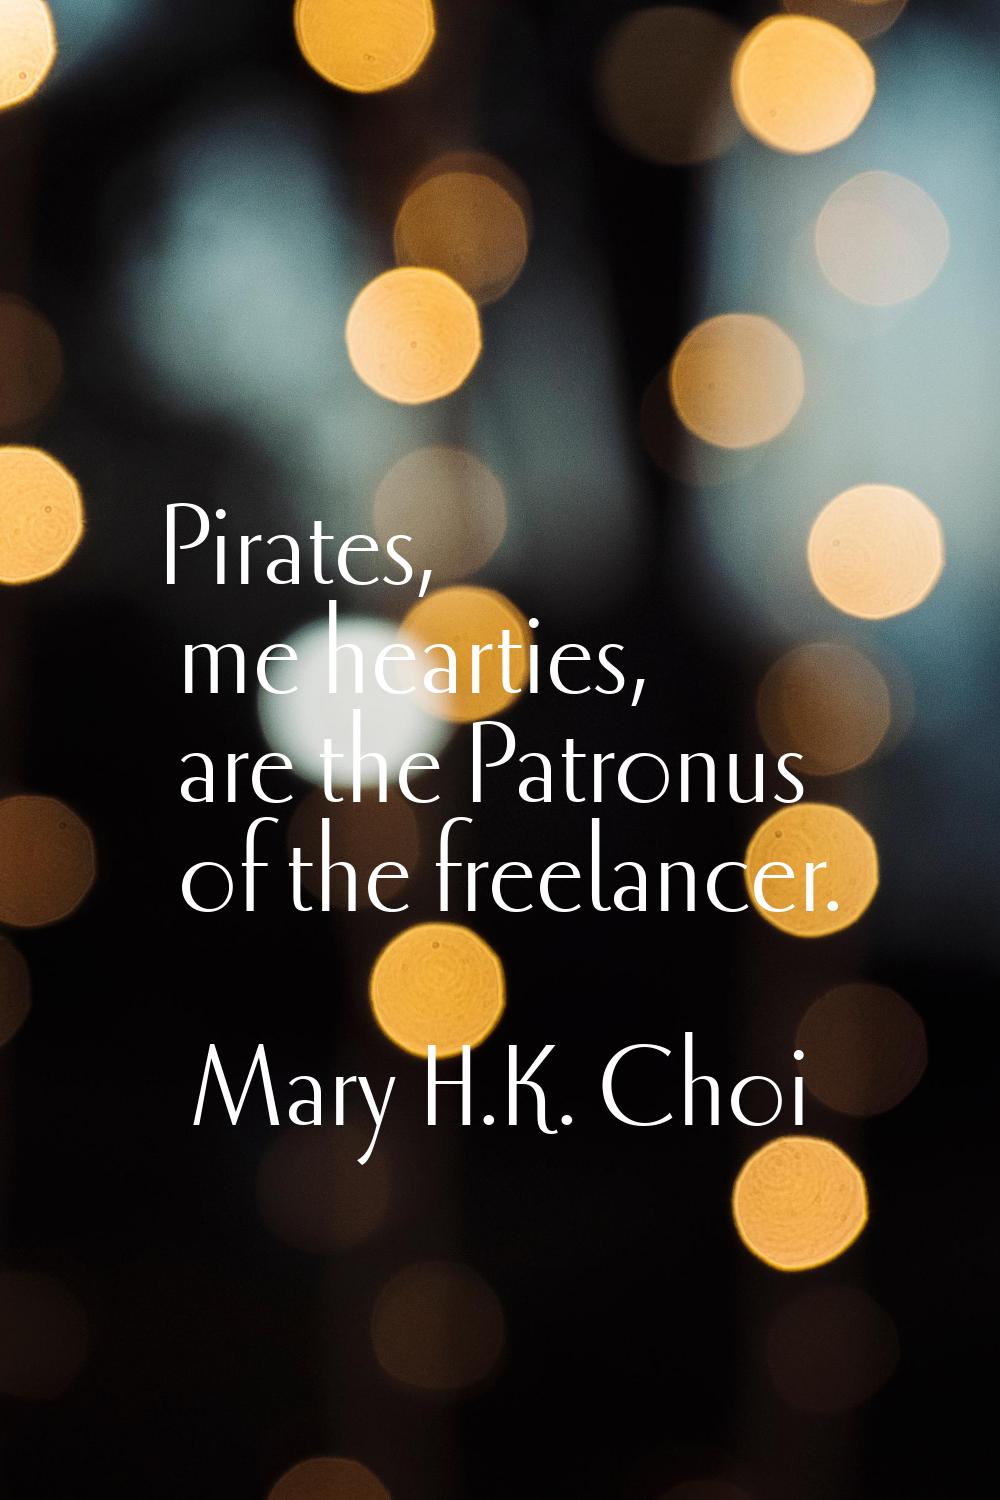 Pirates, me hearties, are the Patronus of the freelancer.